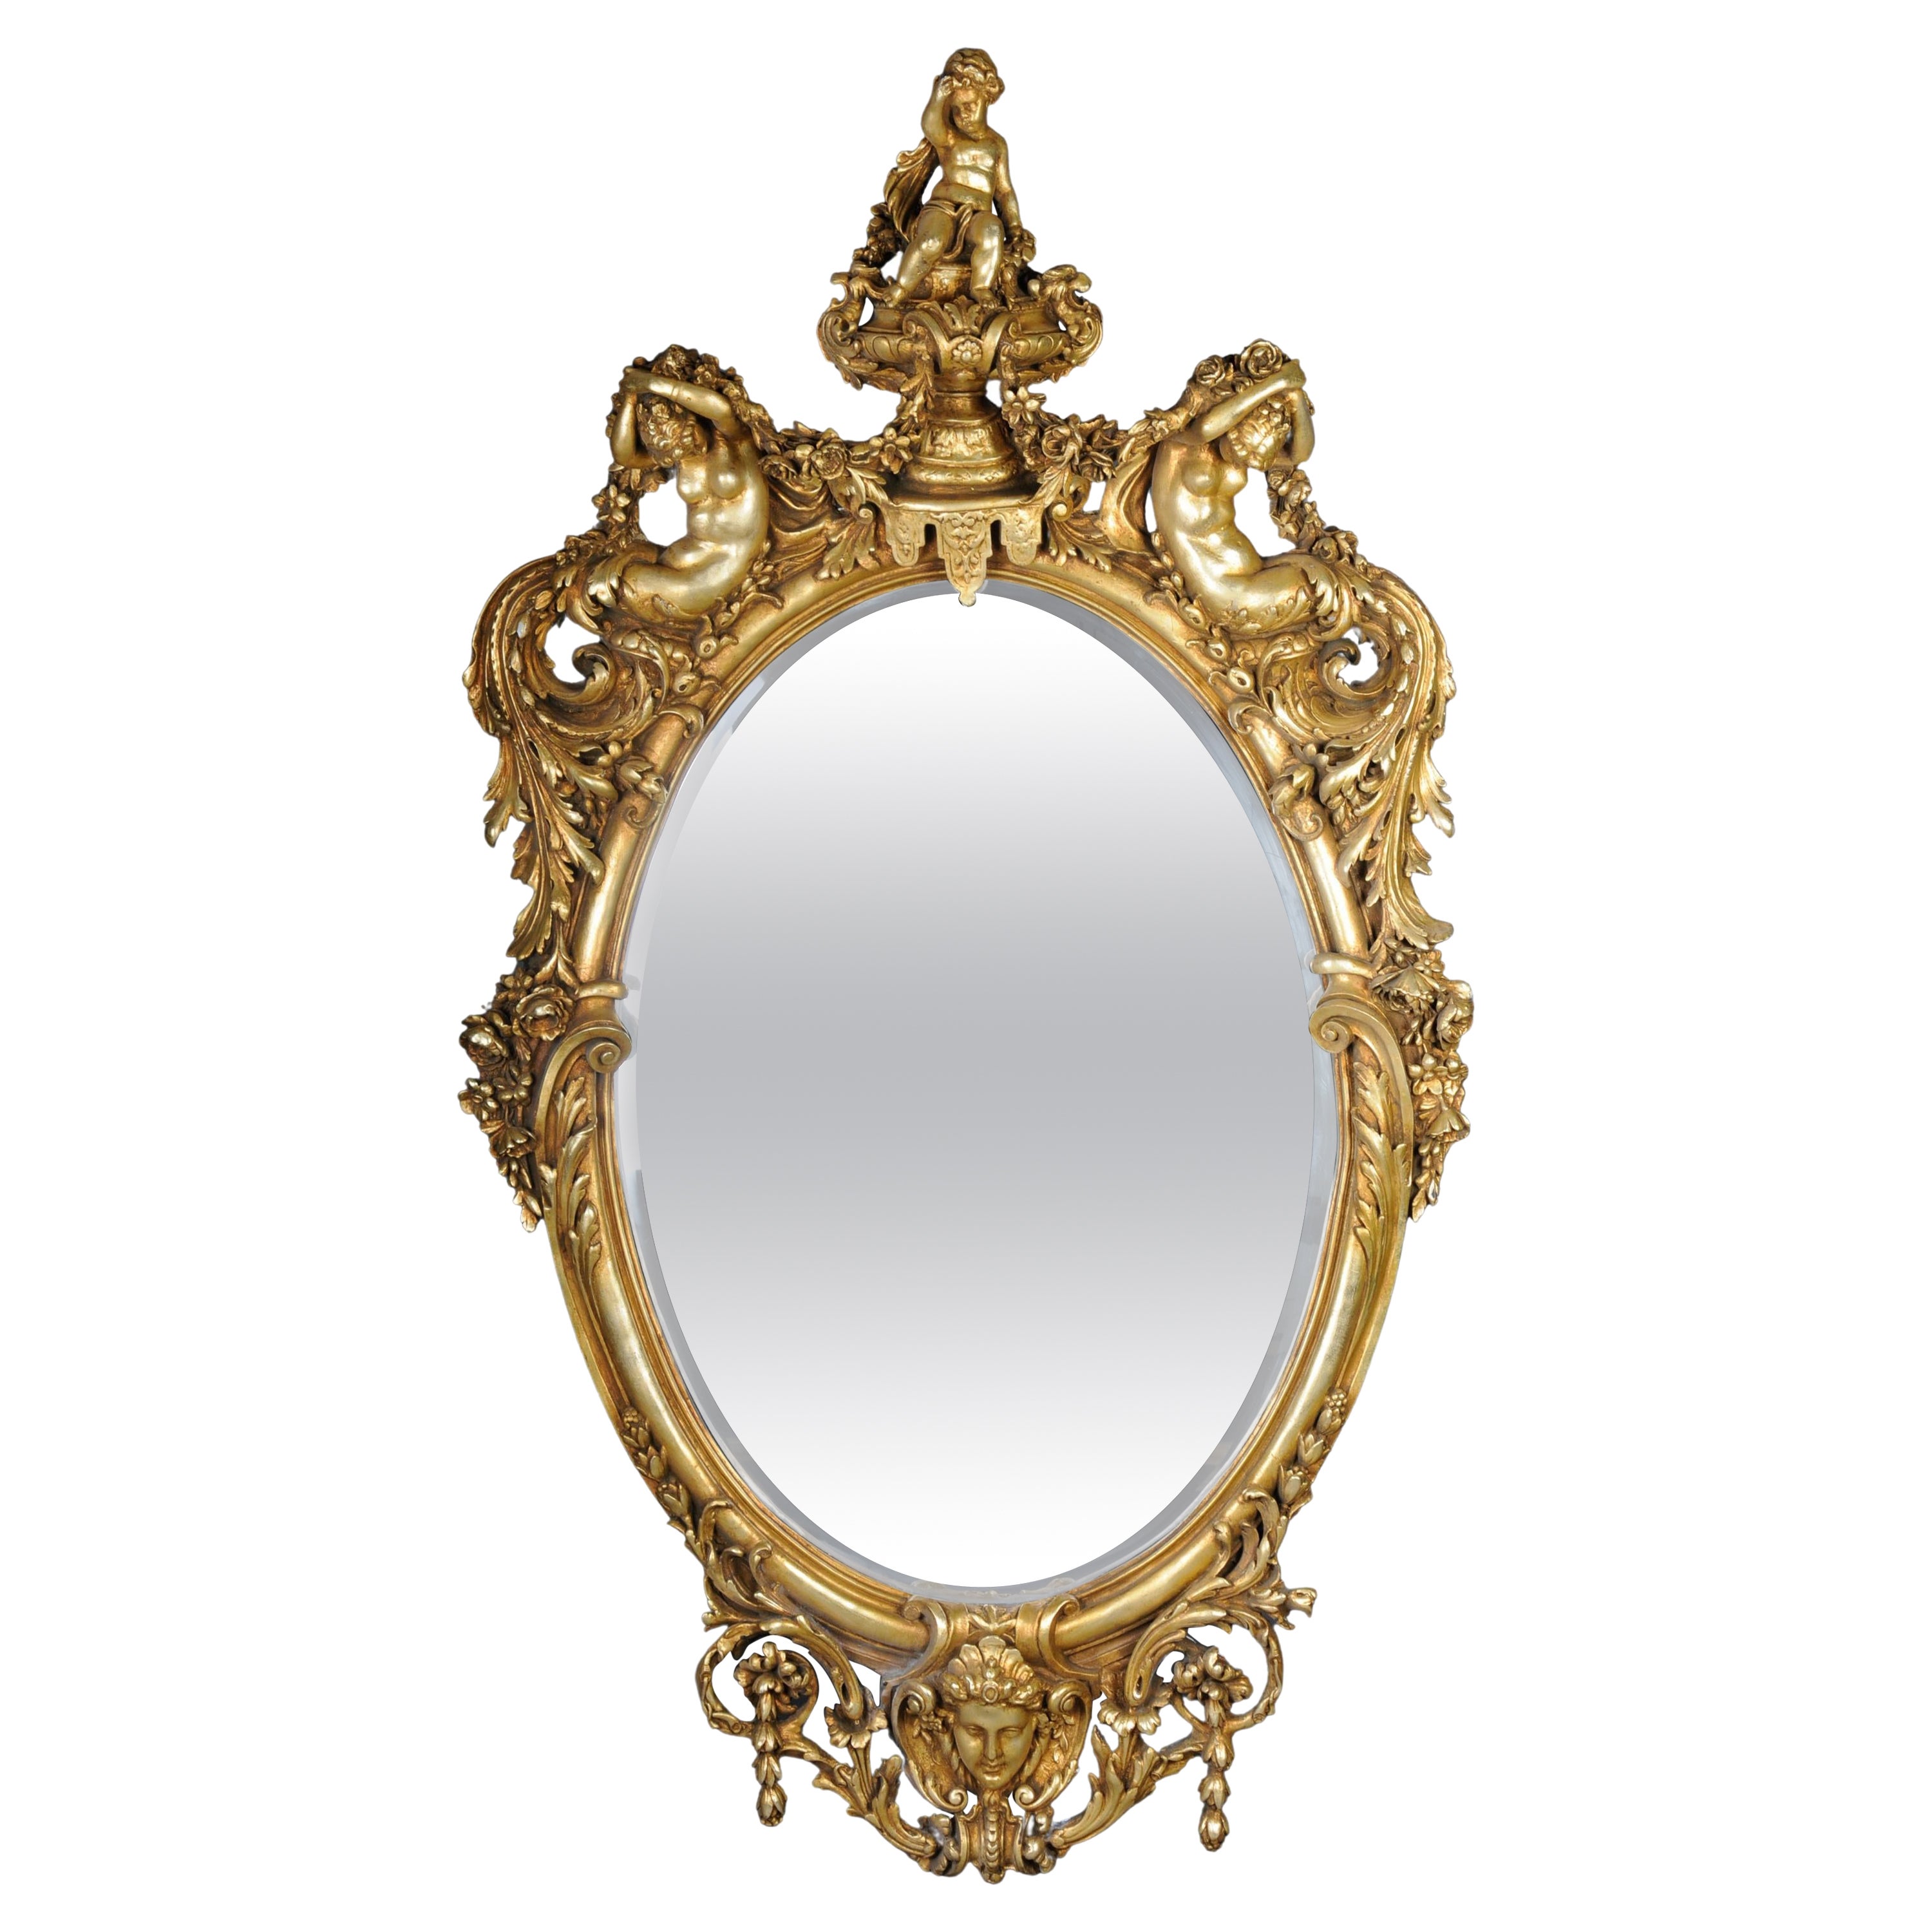 Royal and Monumental Gilded Wall Mirror After F. Linke, Paris For Sale